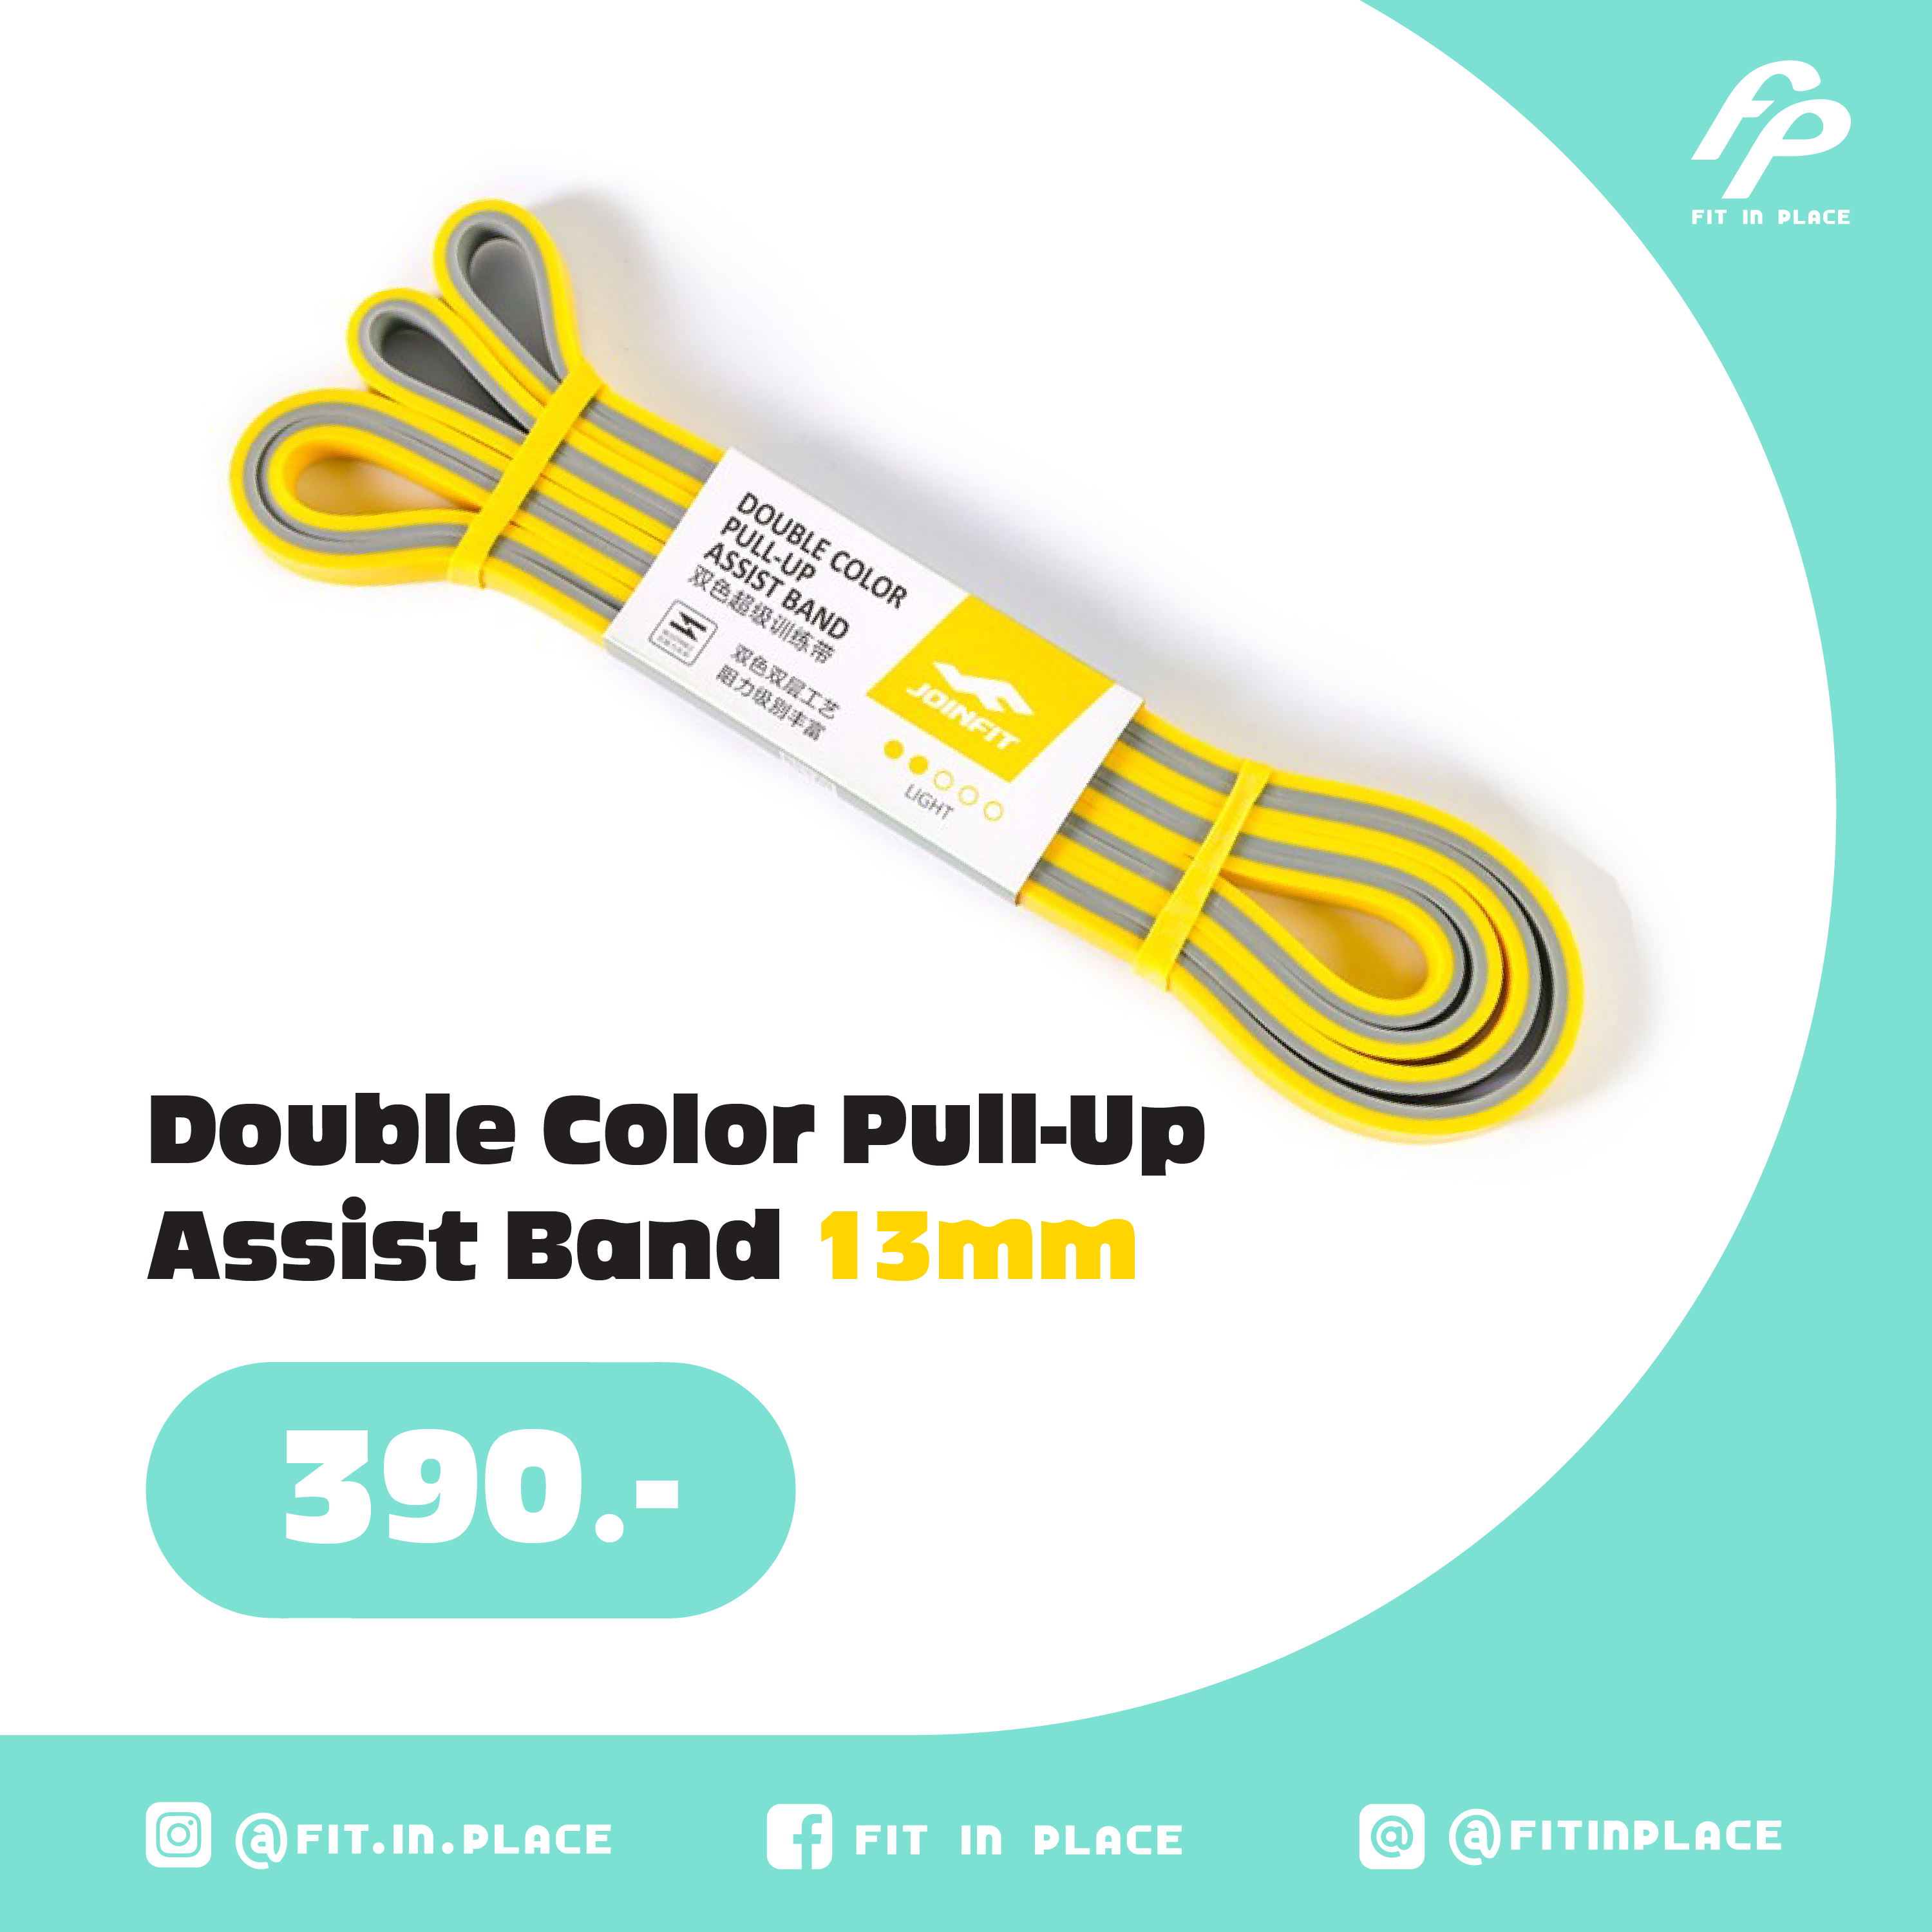 Fit in Place - Joinfit Double Color Pull-up Assist Band 13mm